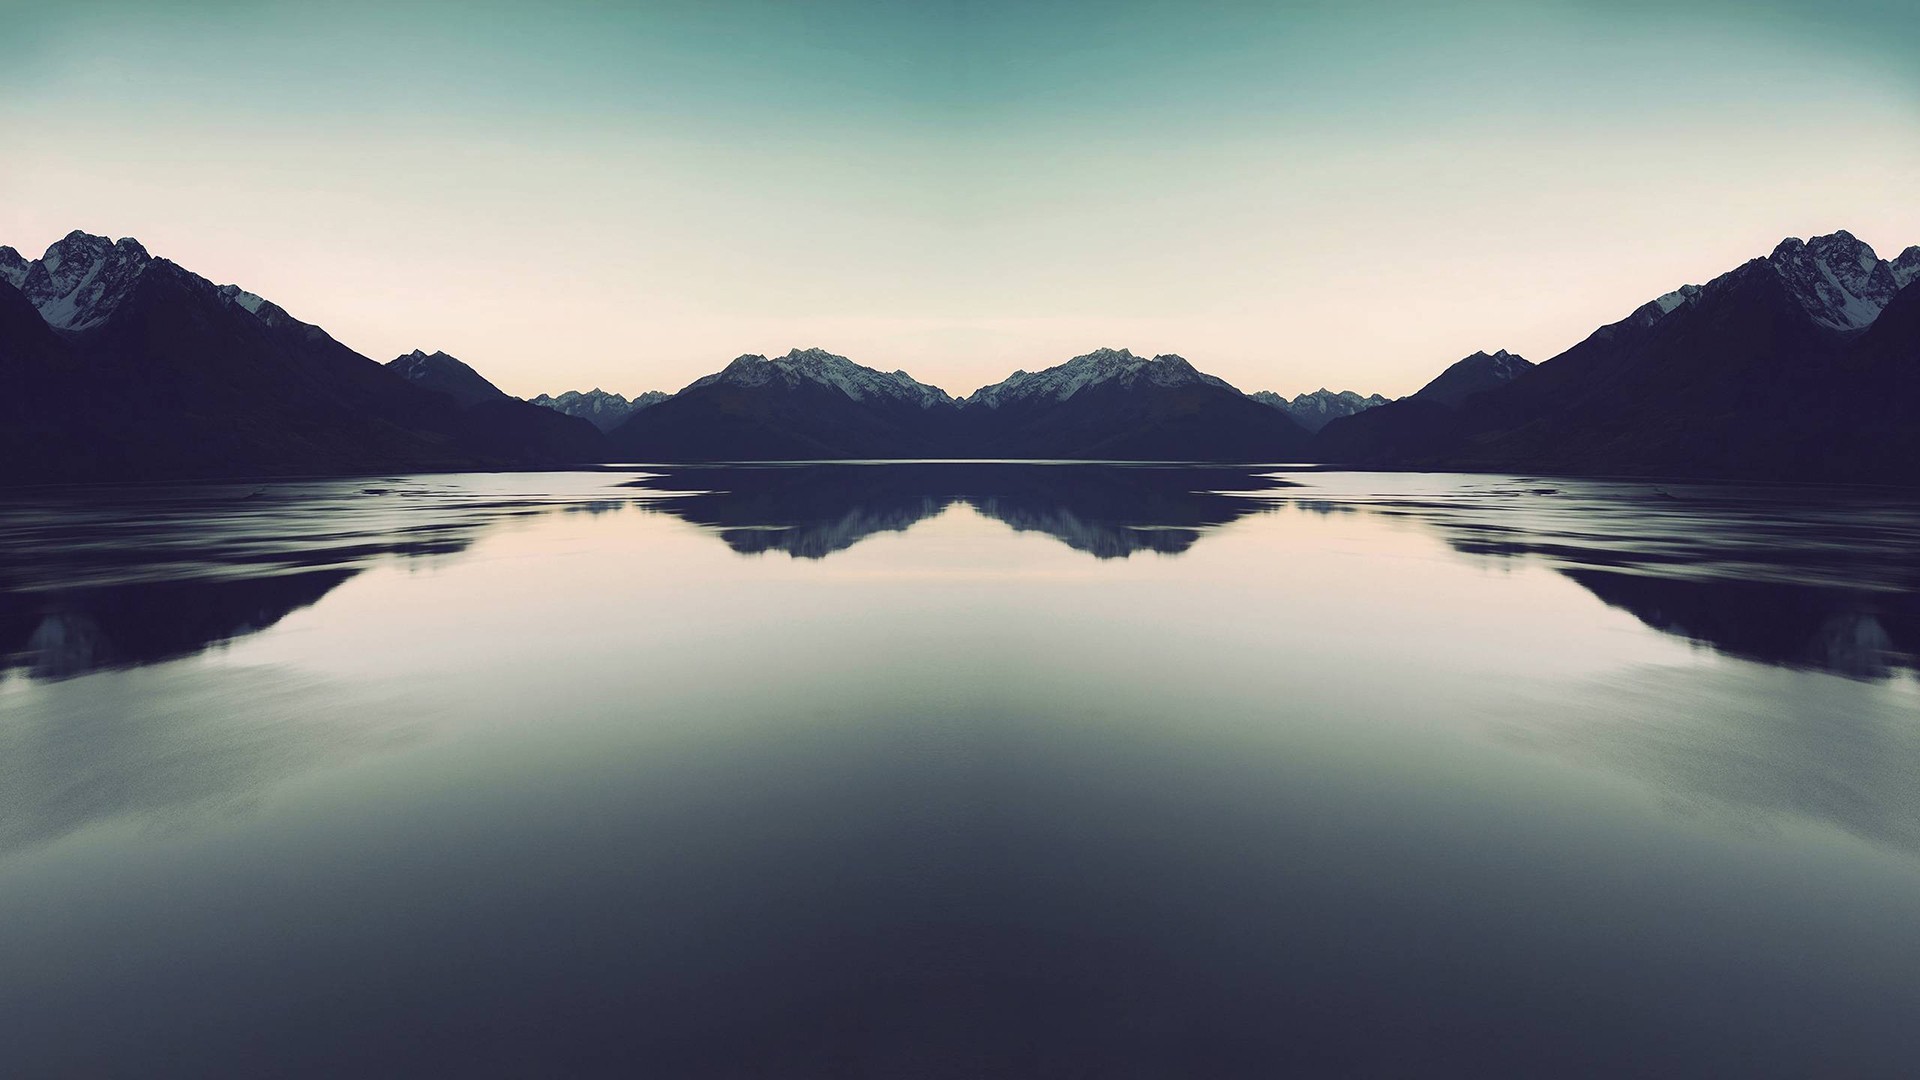 General 1920x1080 lake mountains landscape reflection sky water nature outdoors